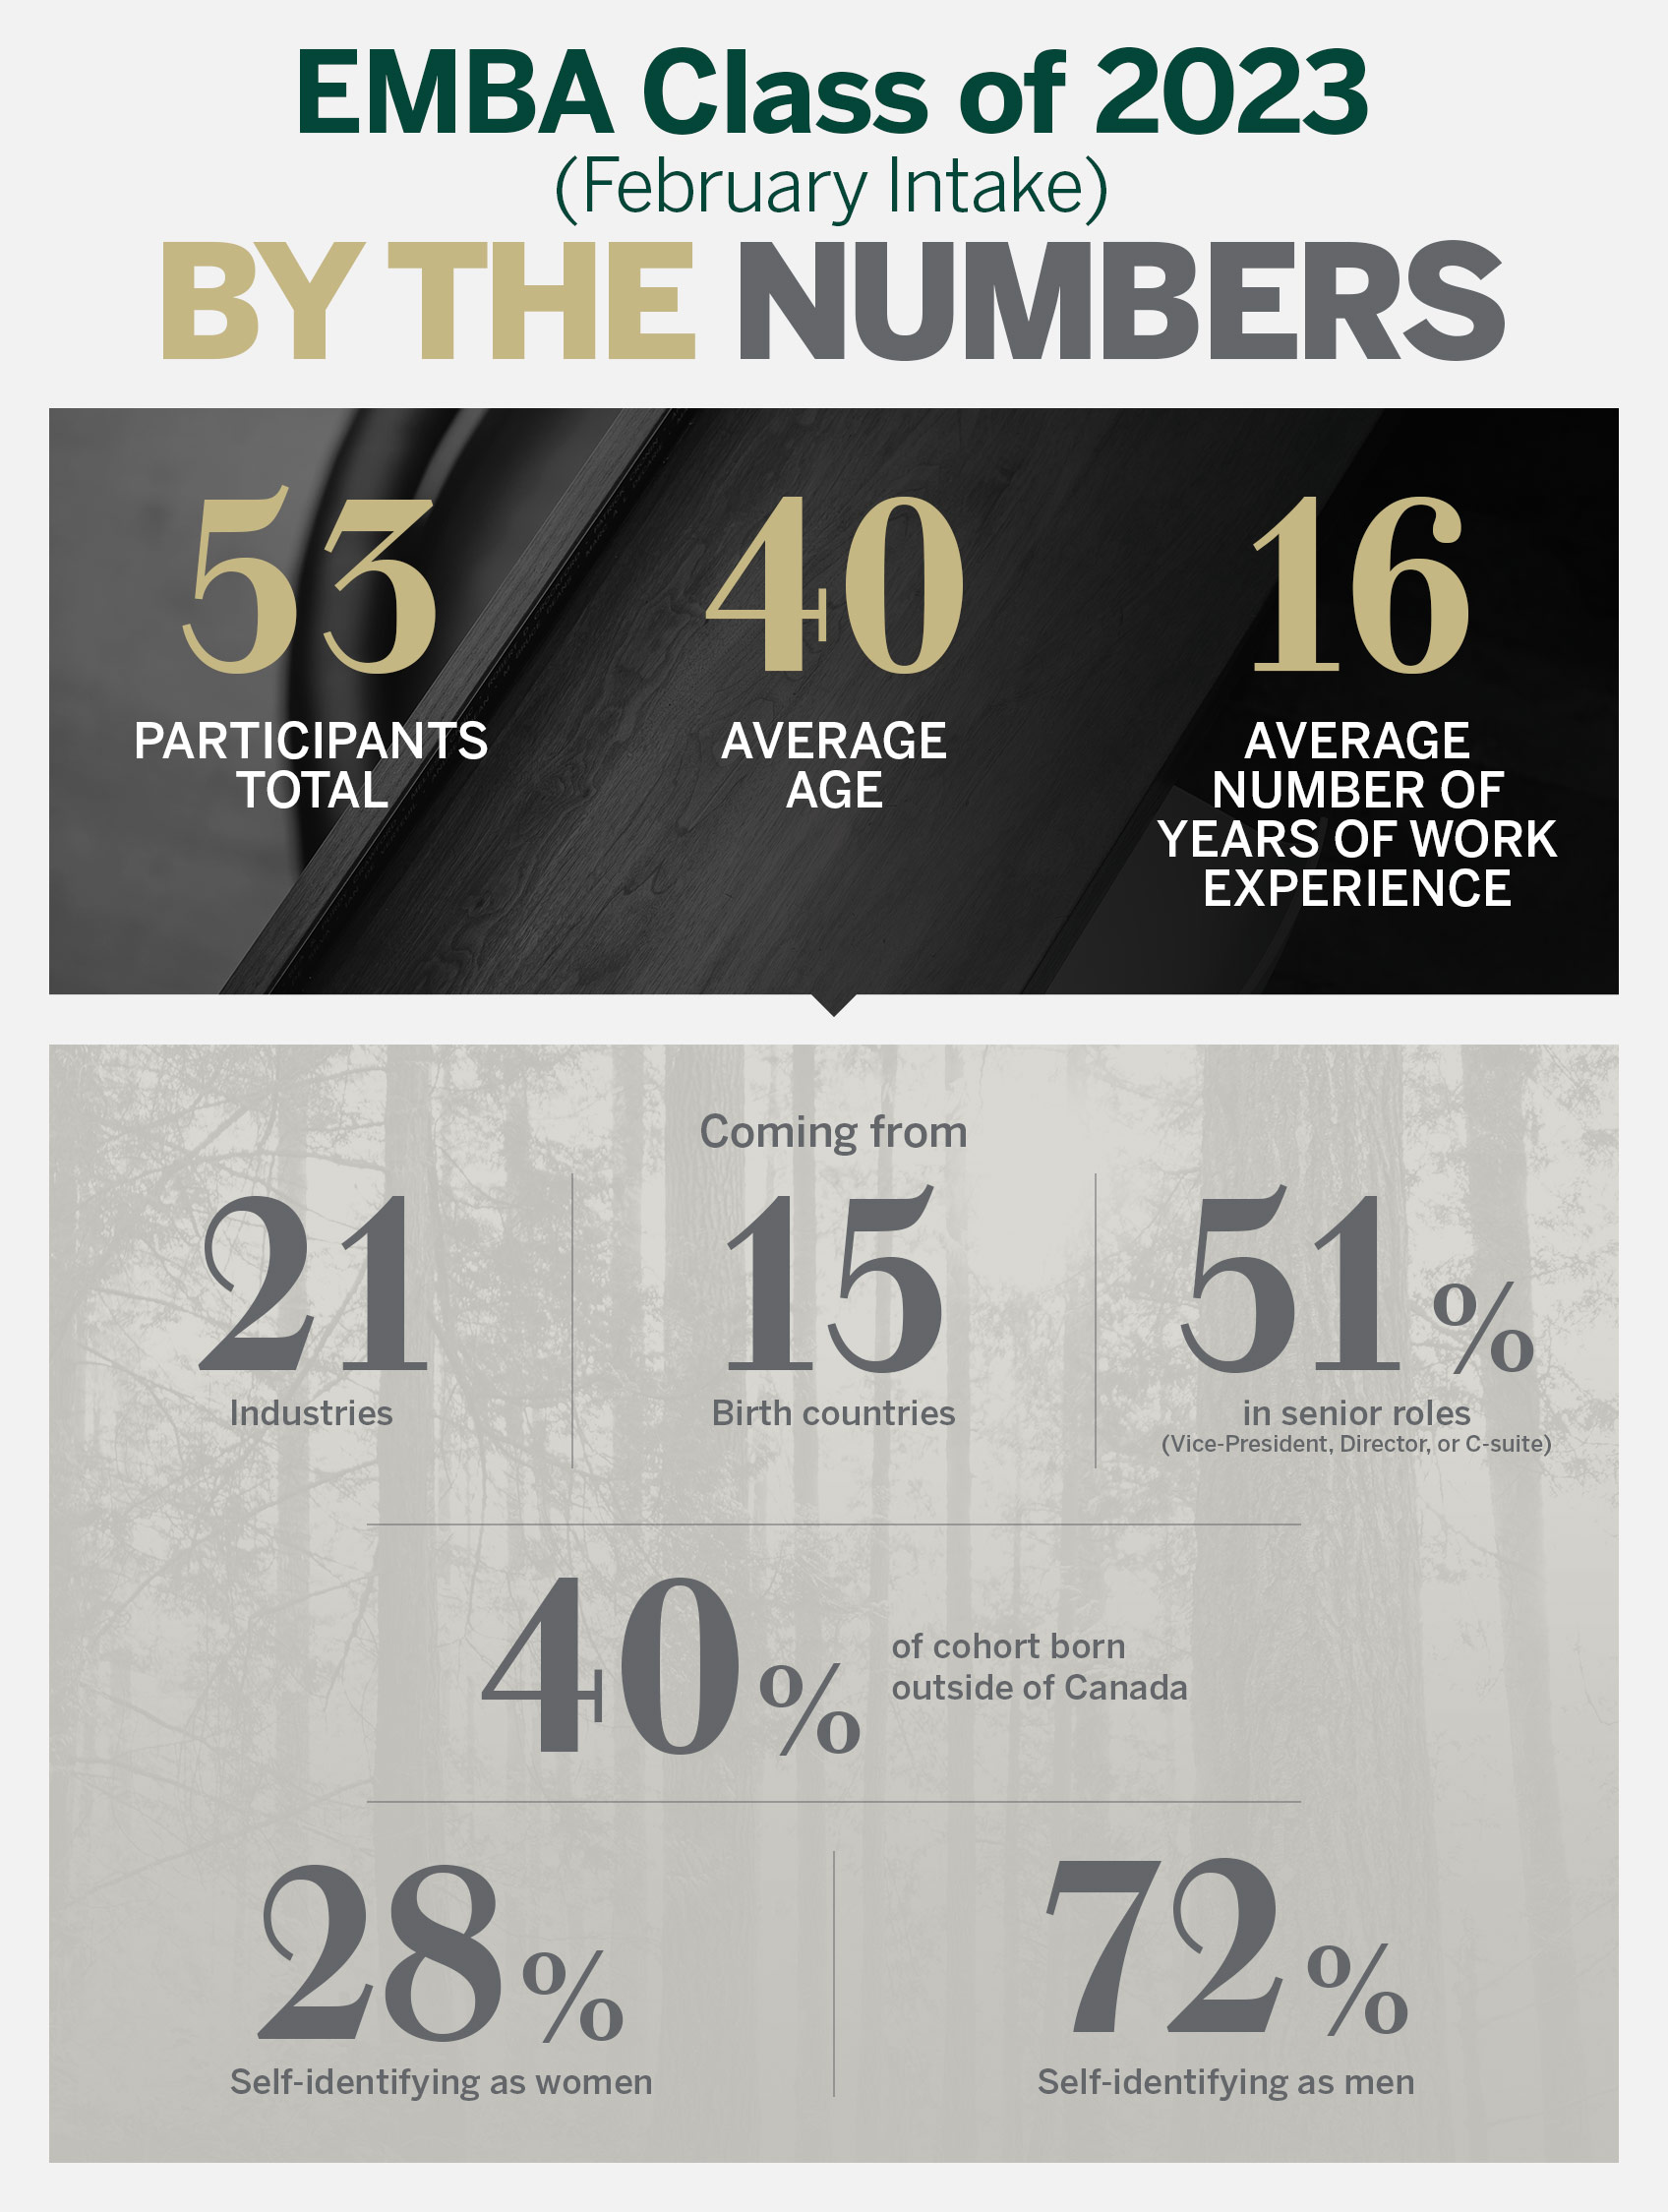 EMBA Class of 2023 (February intake) By the Numbers